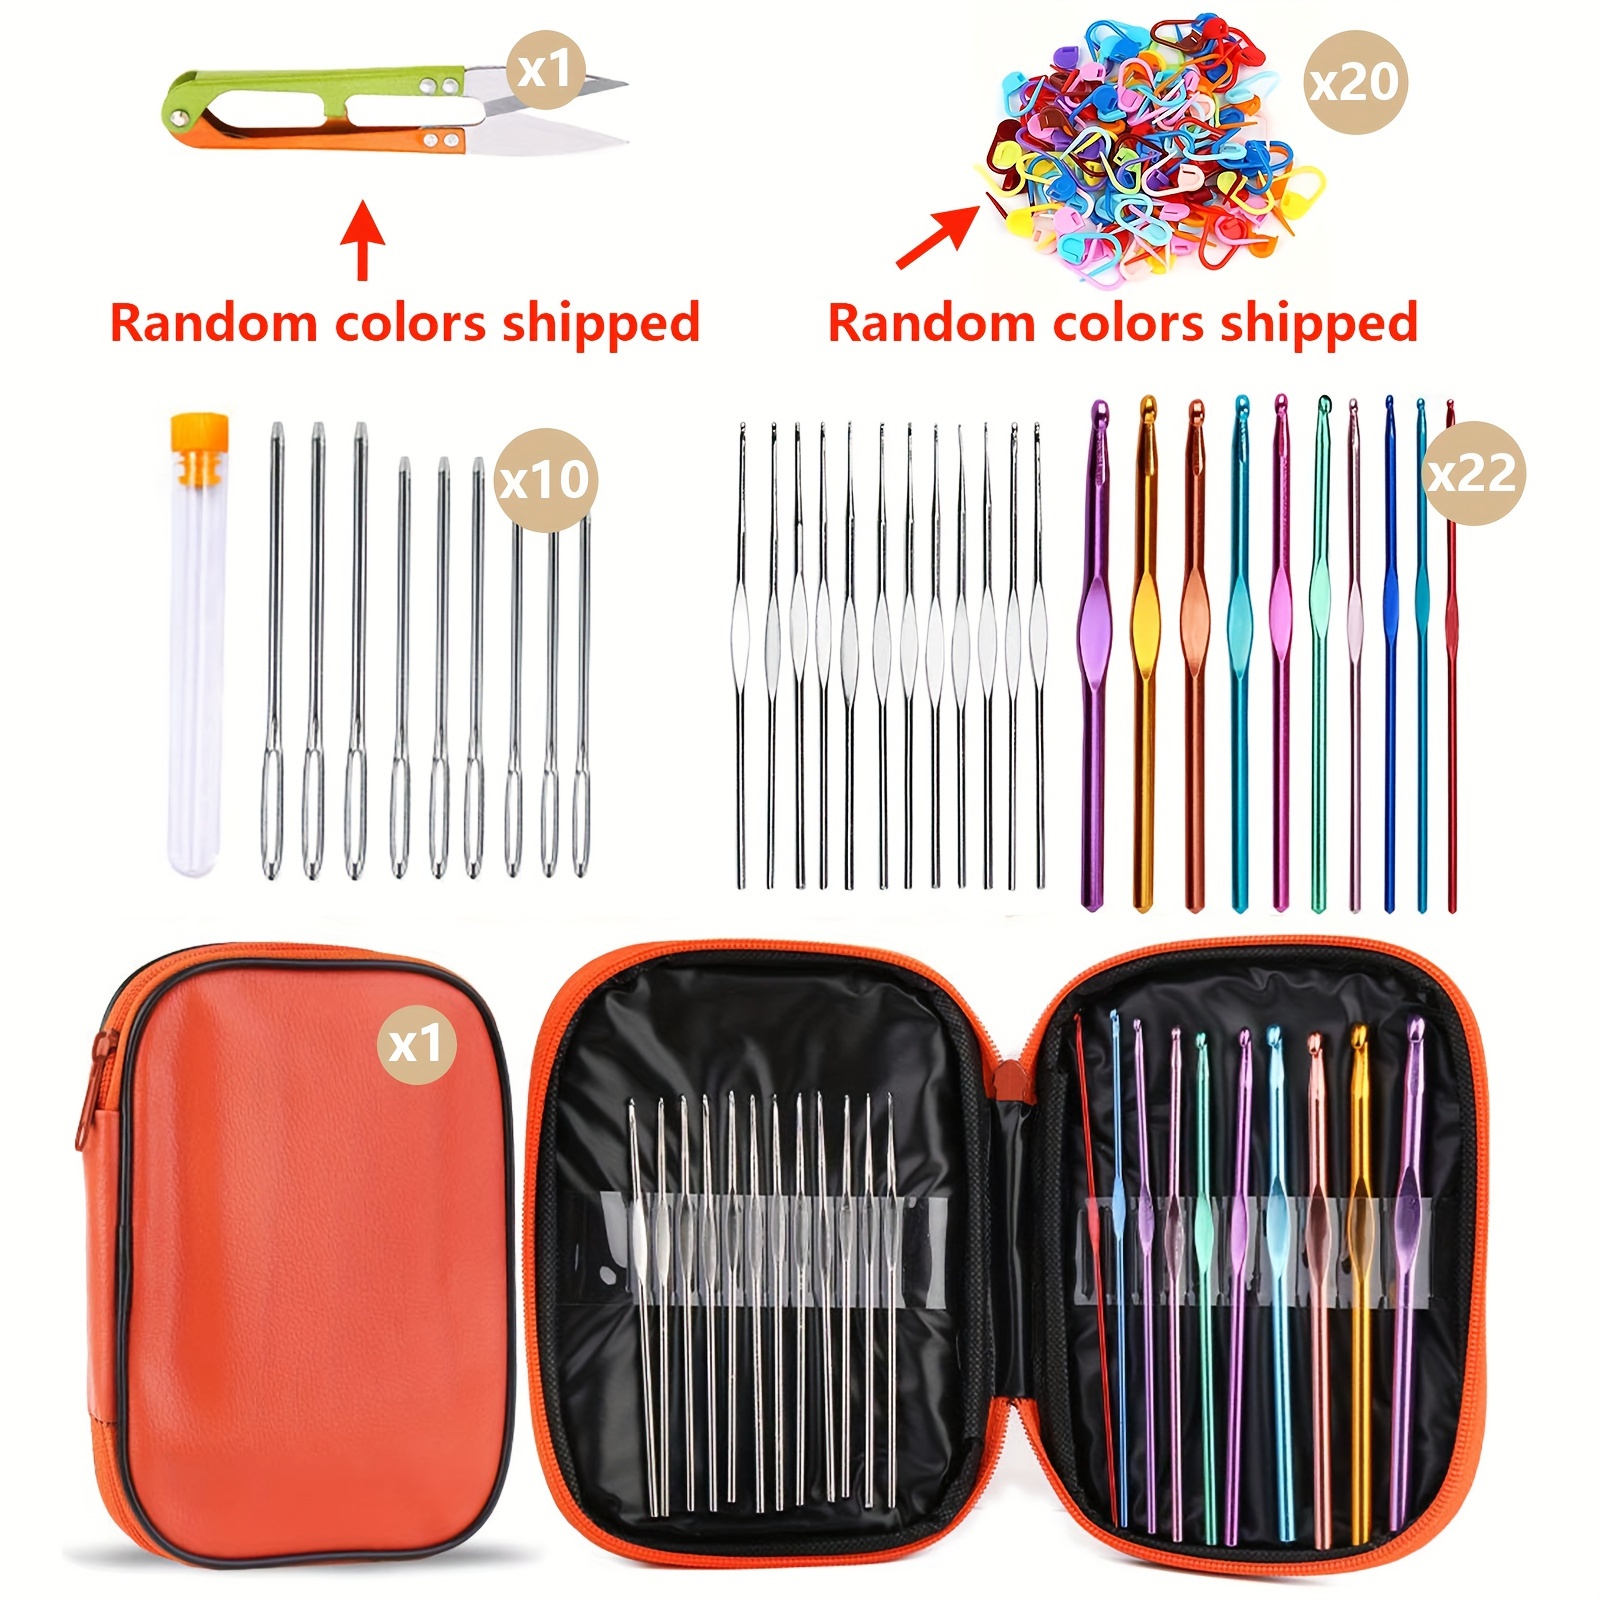 KRABALL Knit Crochet Hook Kit Knitting Needles Set With Bag,Steel Large Eye  Blunt Needle,Markers,DIY Hand Sewing Accessories - AliExpress